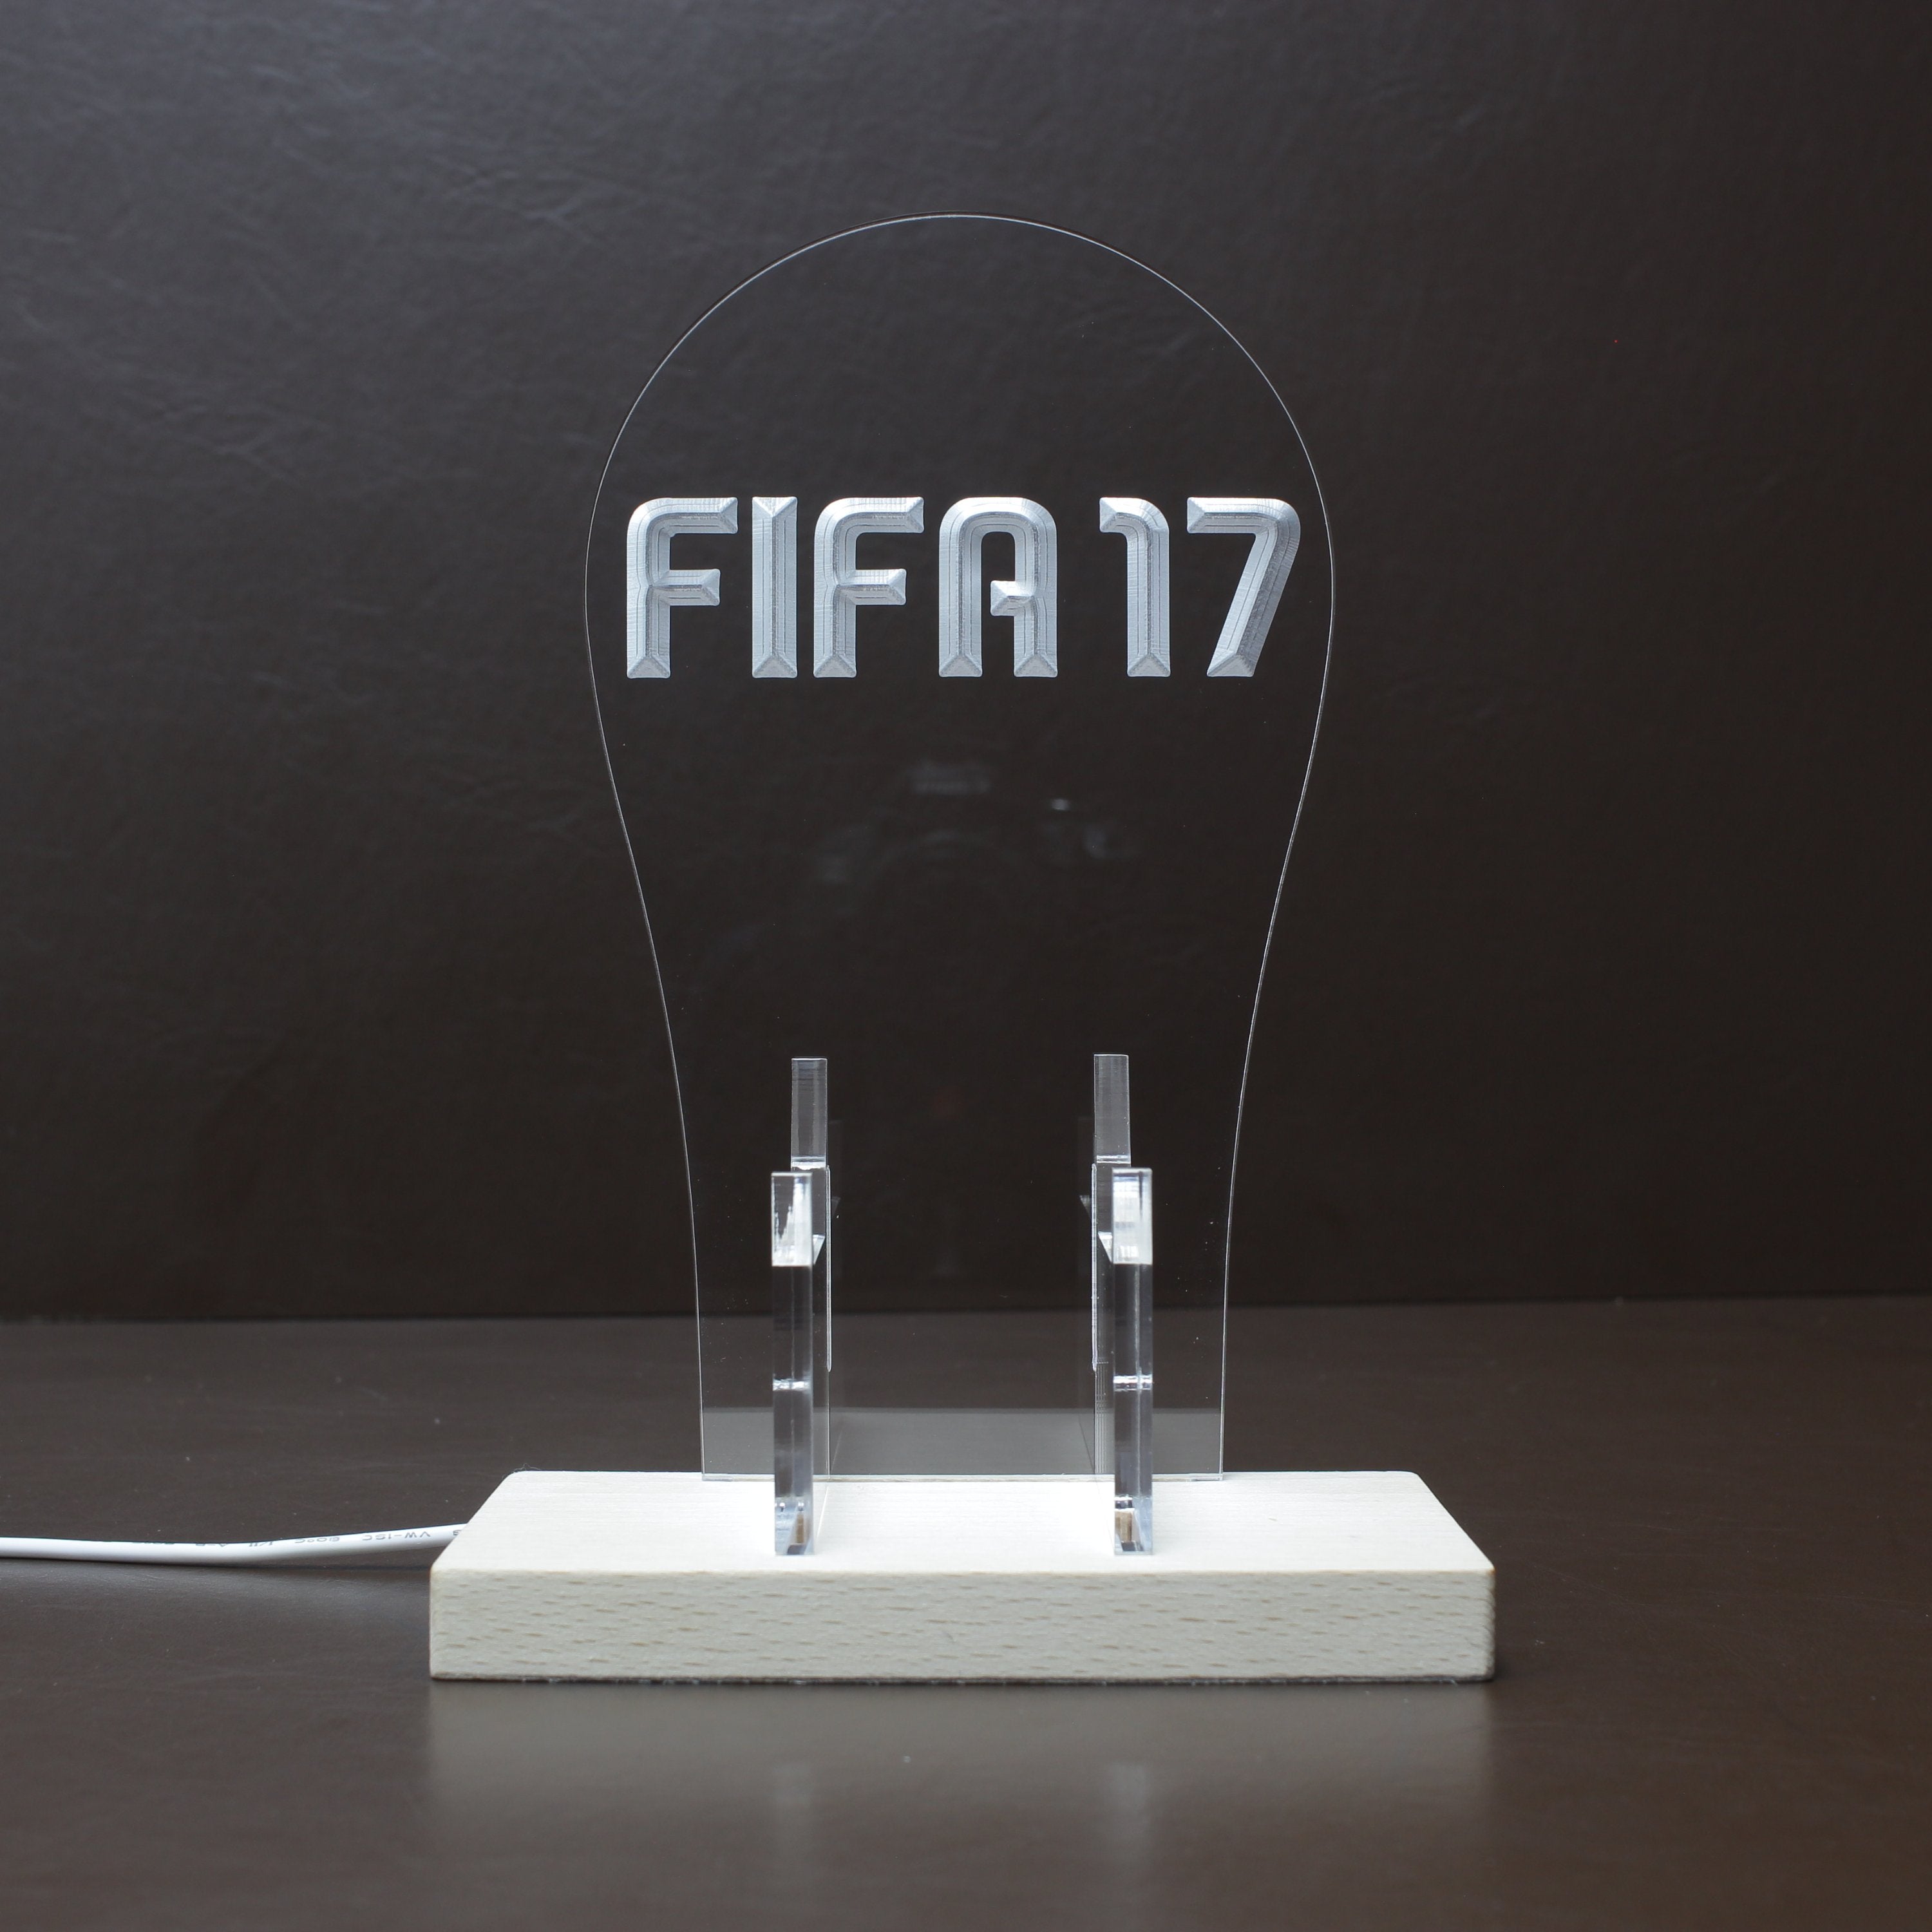 FIFA17 RGB LED Gaming Headset Controller Stand